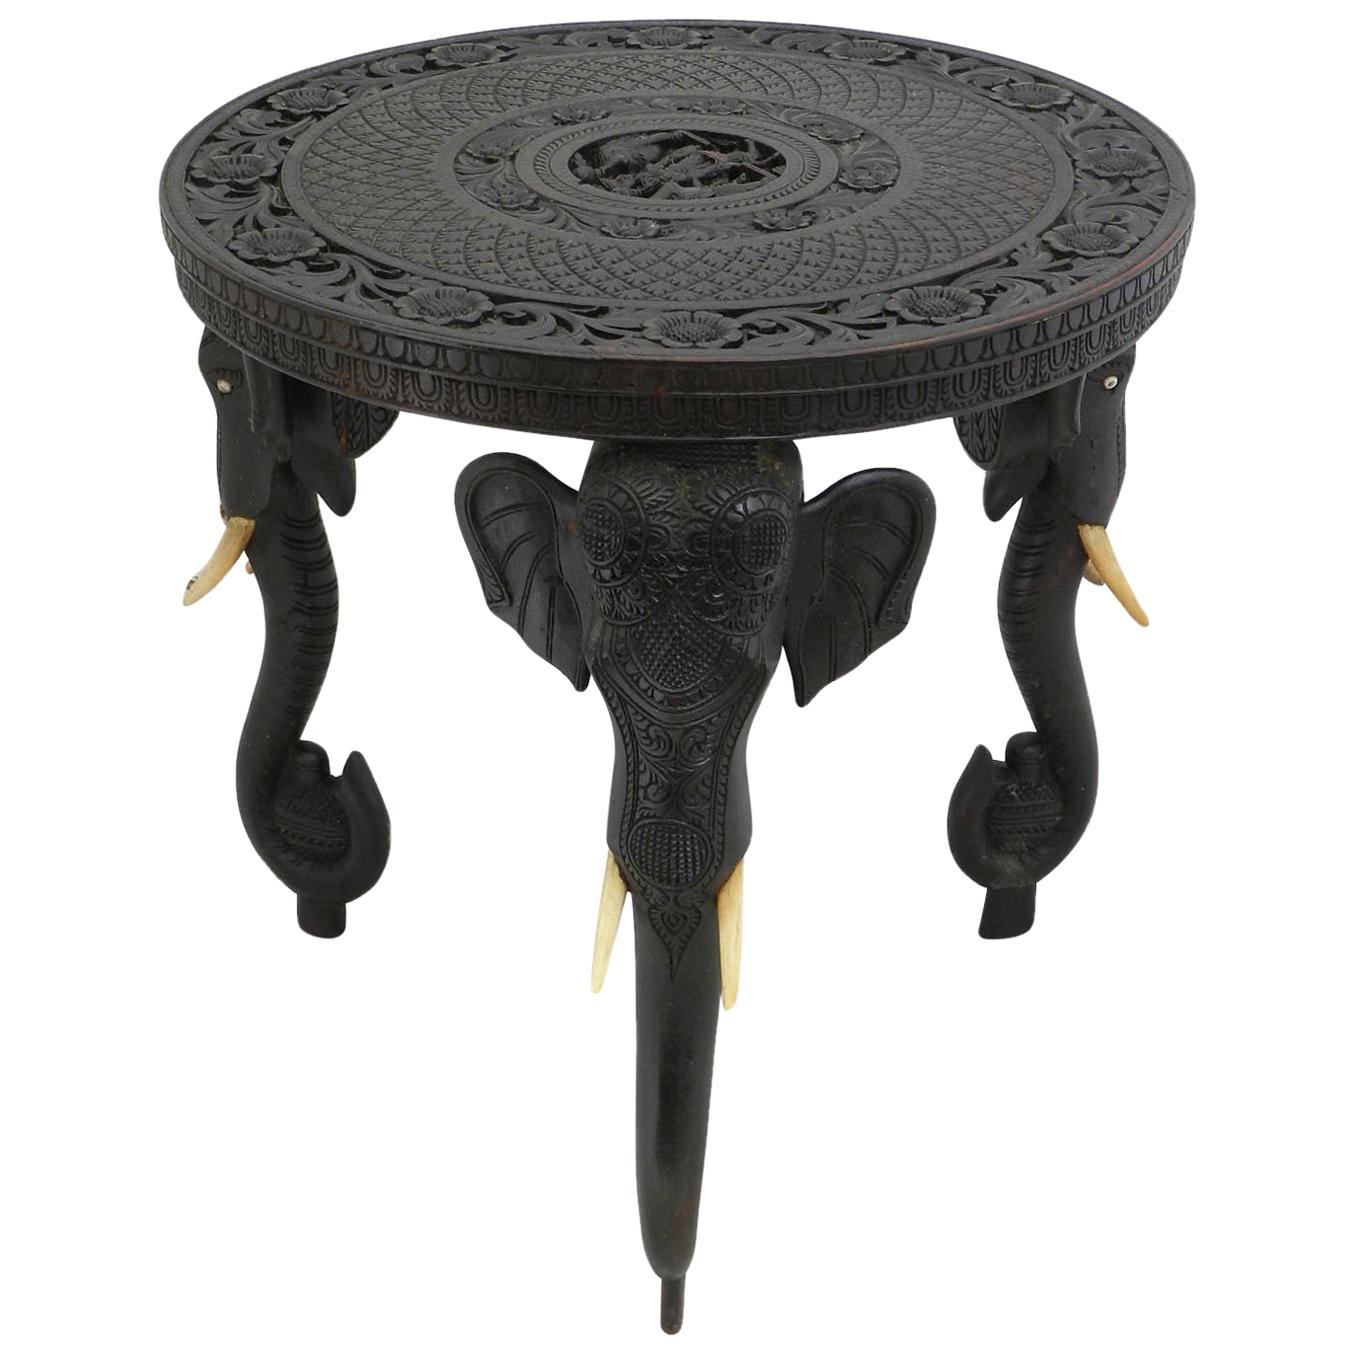 19th Century Anglo Indian Side Table with Elephant Head Legs